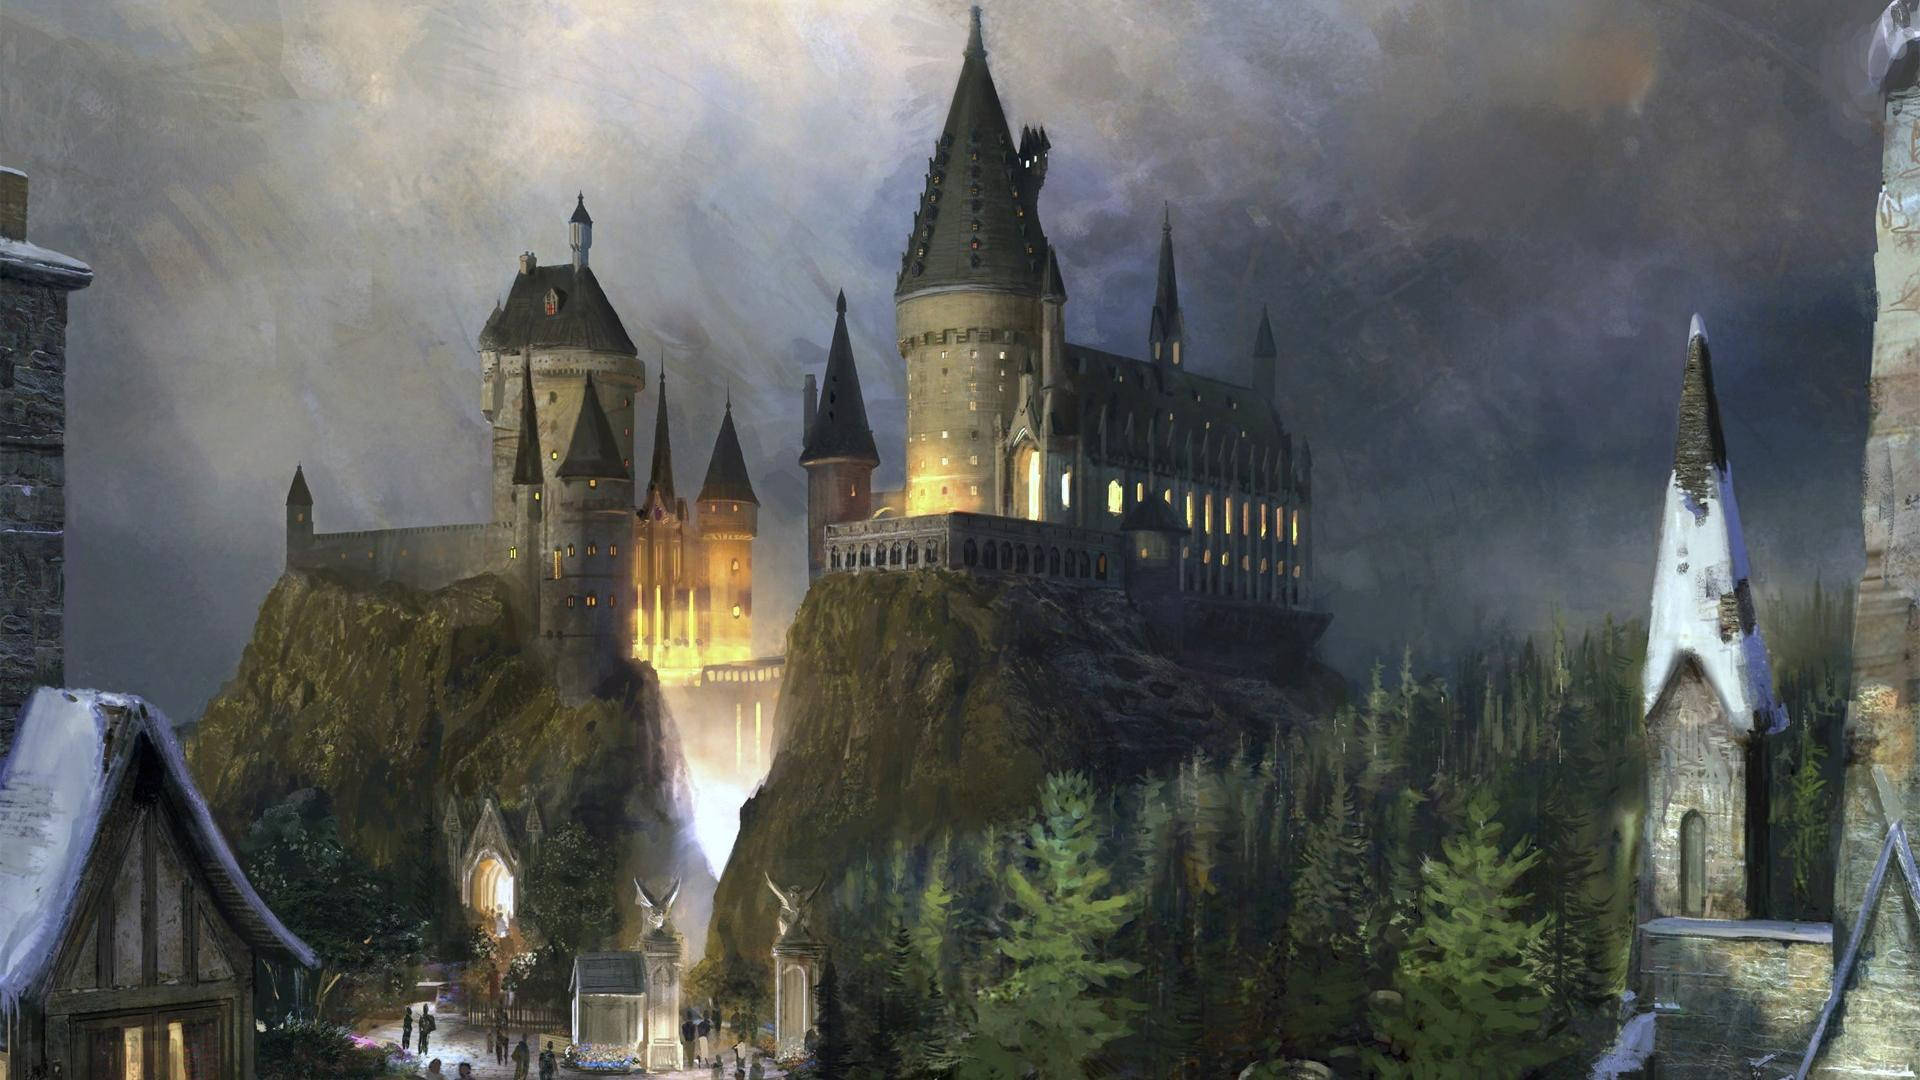 “The Magical Castle of Hogwarts” Wallpaper